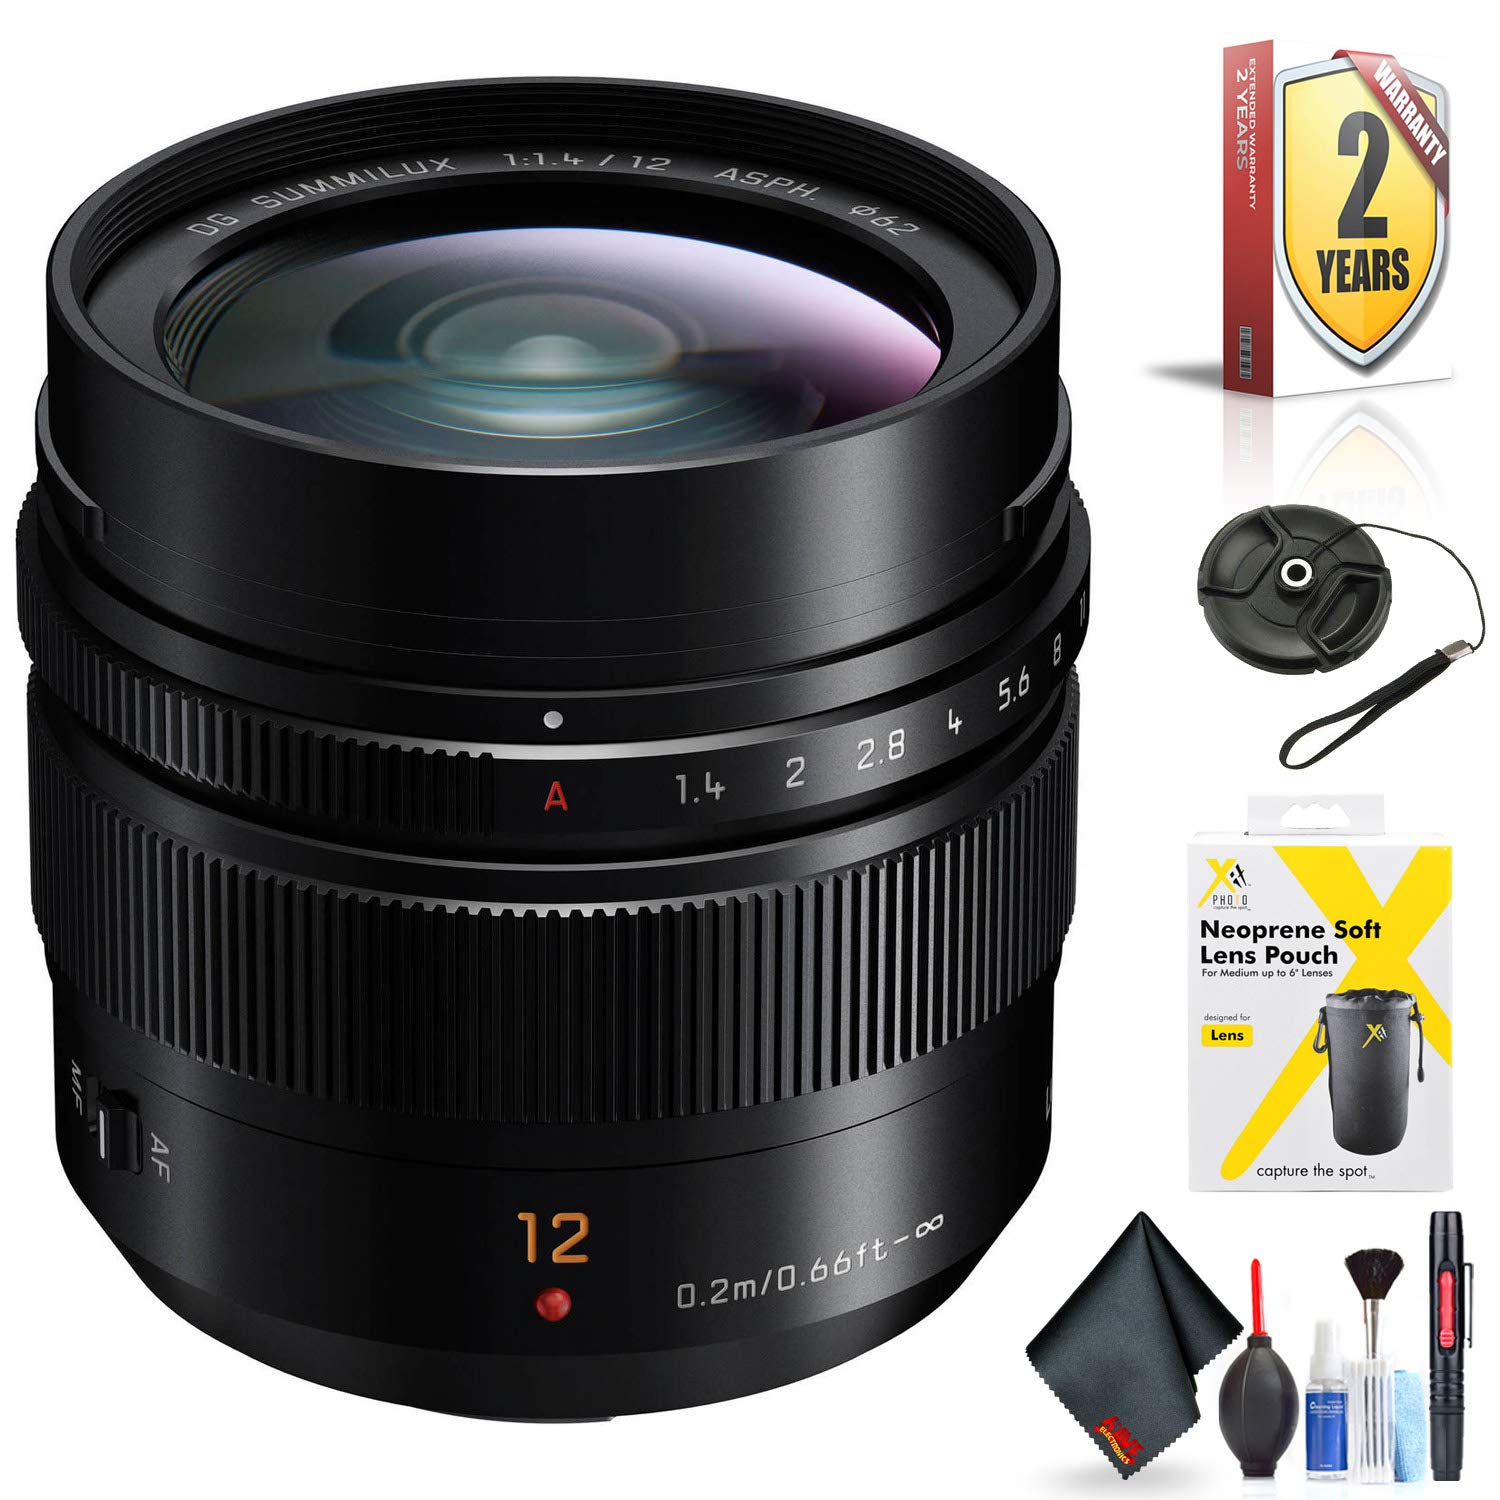 Panasonic Leica DG Summilux 12mm f/1.4 ASPH. Lens for Micro Four Thirds Mount + Accessories (International Model with 2